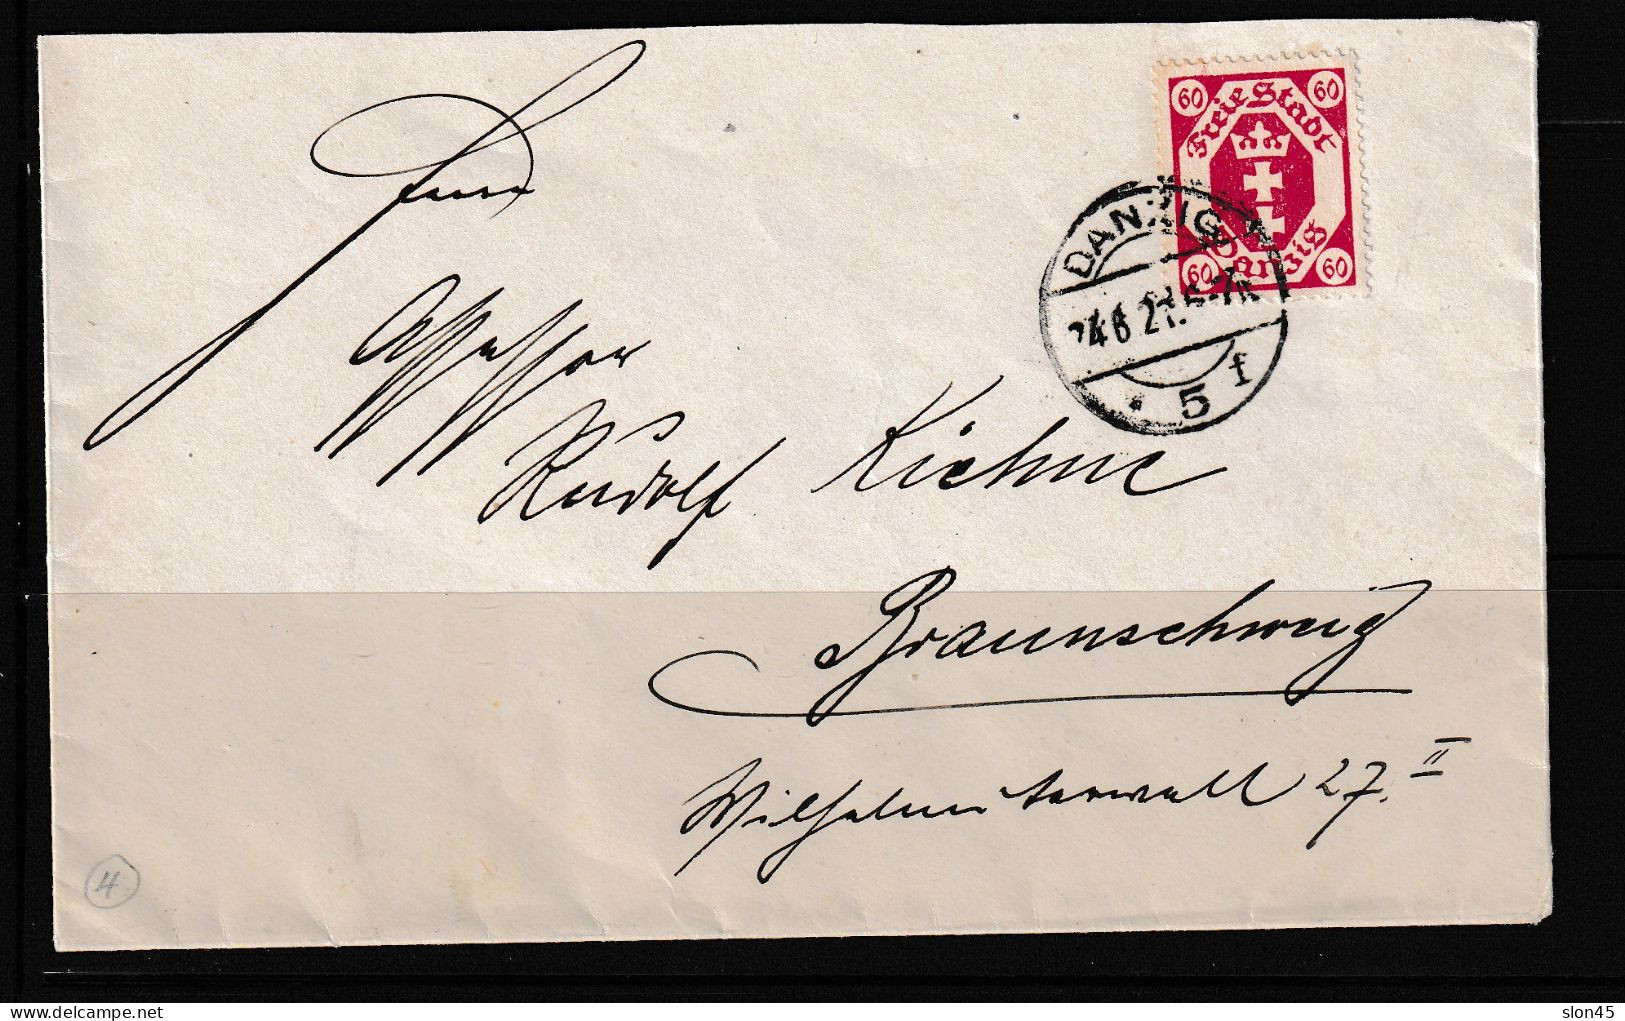 Germany Poland Danzig Cover 1921 Franked By 60pf 15324 - Covers & Documents